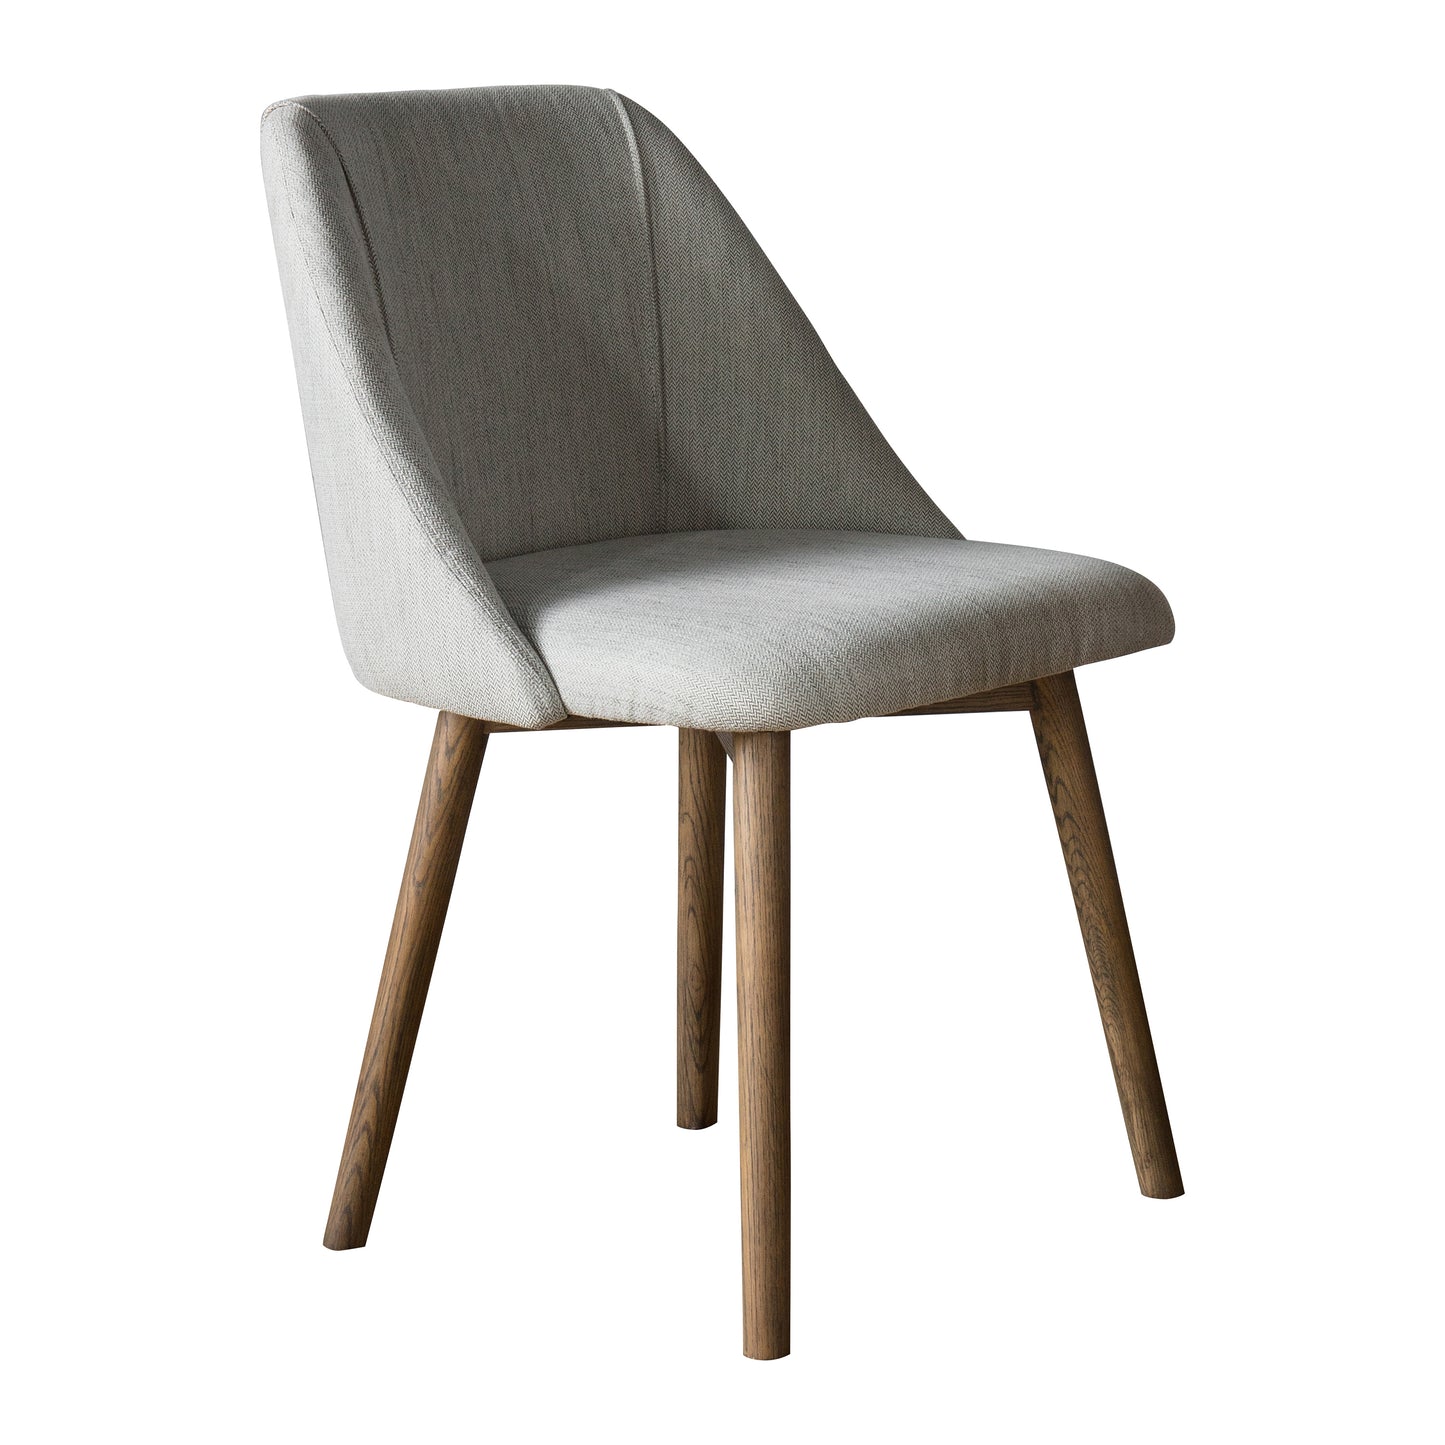 A neutral Hempston dining chair with wooden legs for interior decor.